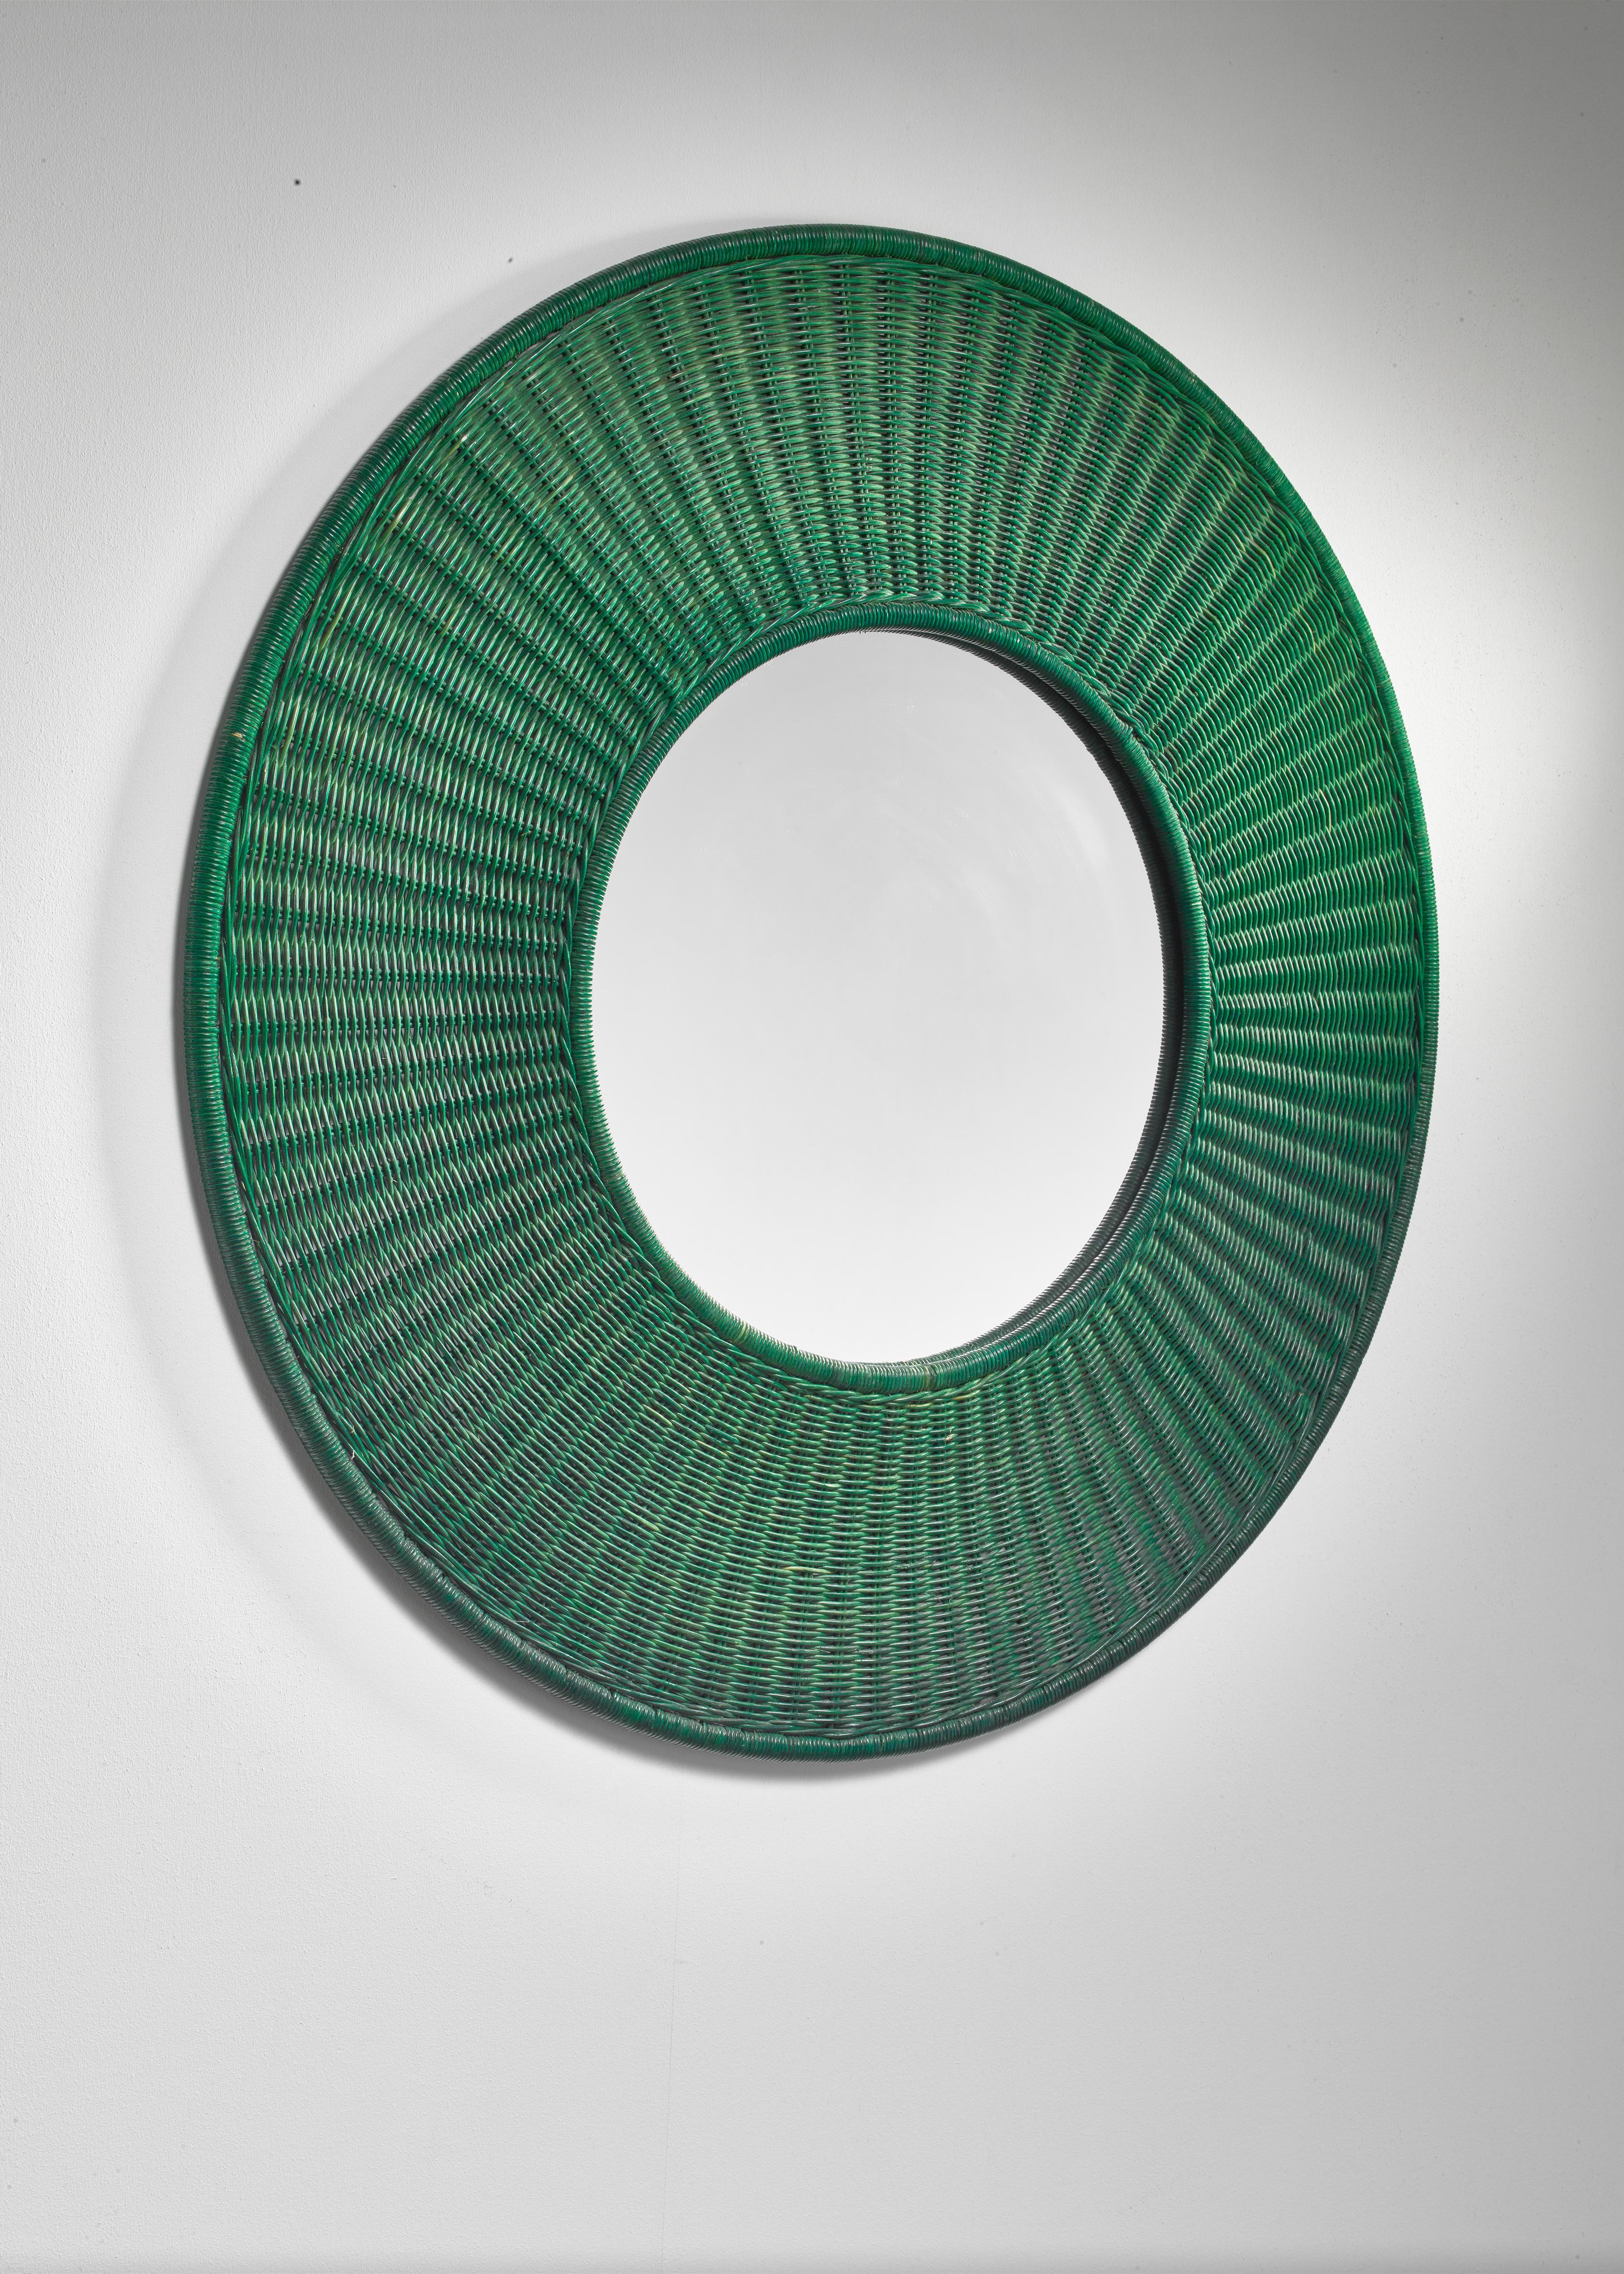 A large wall mirror with a round, green woven cane frame.